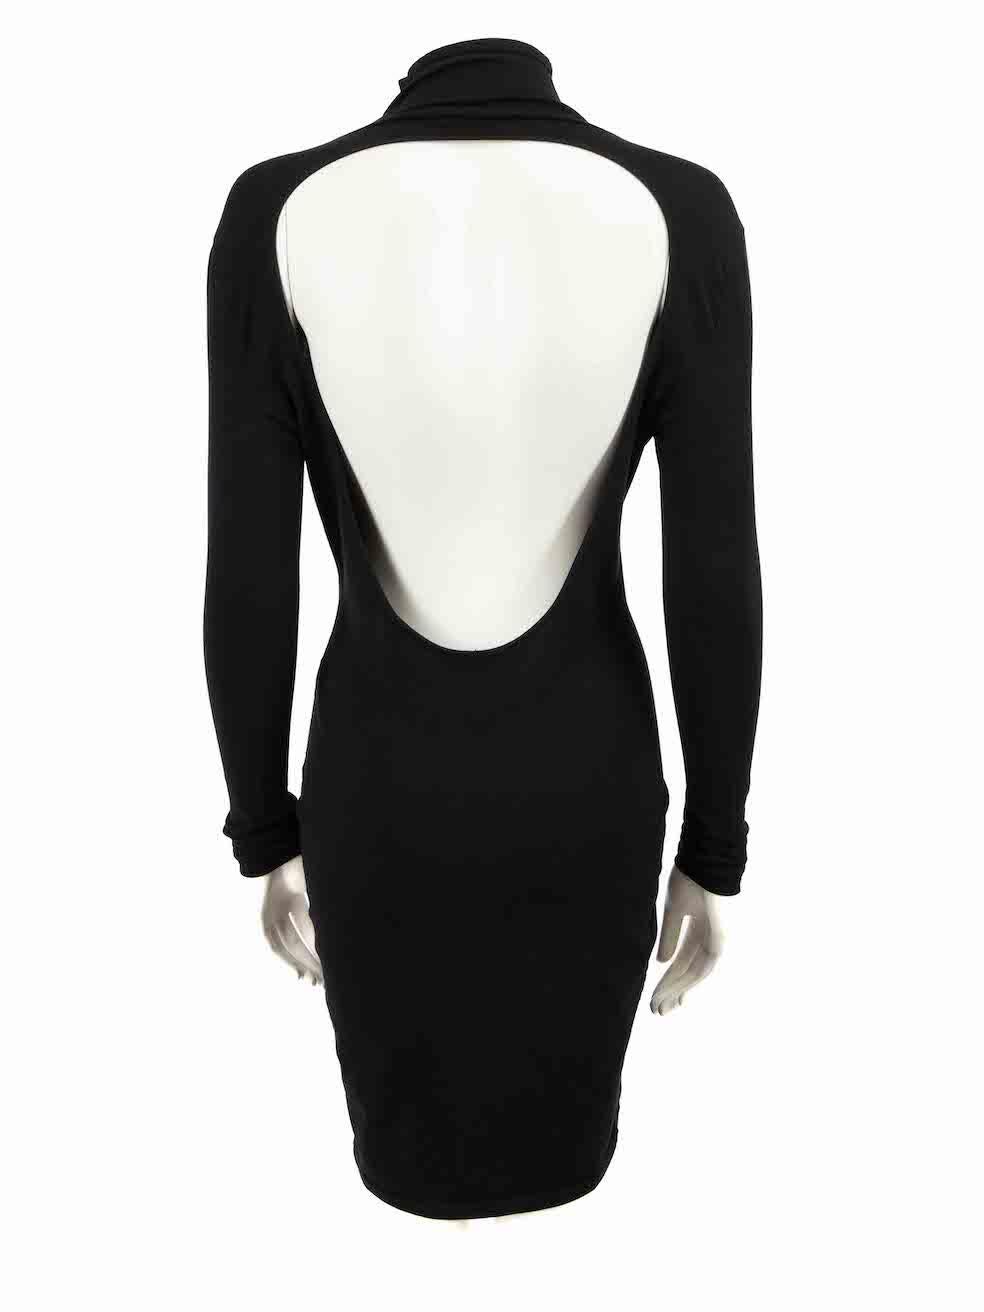 Balenciaga Black Backless Logo Mini Dress Size S In Good Condition For Sale In London, GB